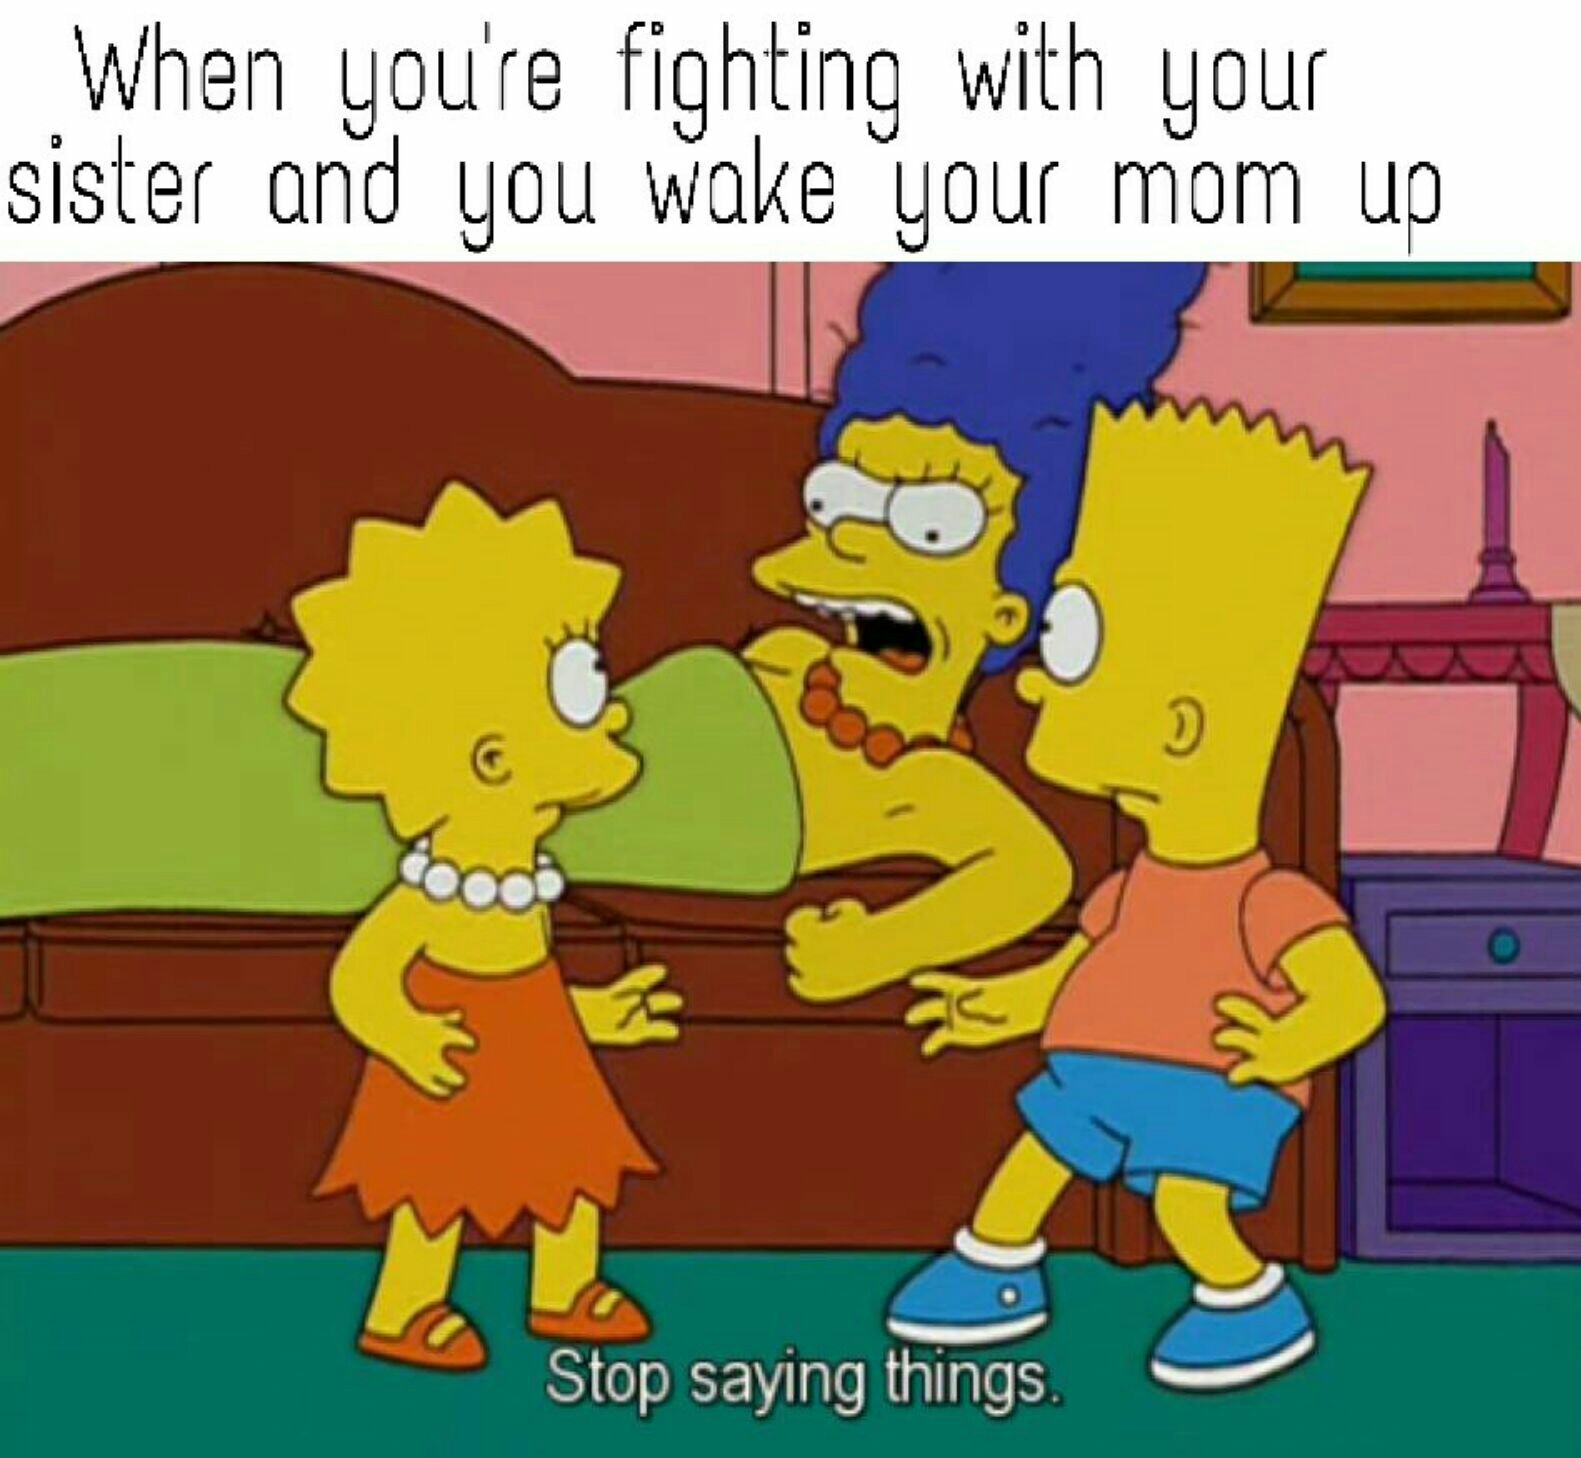 This usually happened with my dad our punishment was taking naps or cleaning my sisters' nasty room - meme